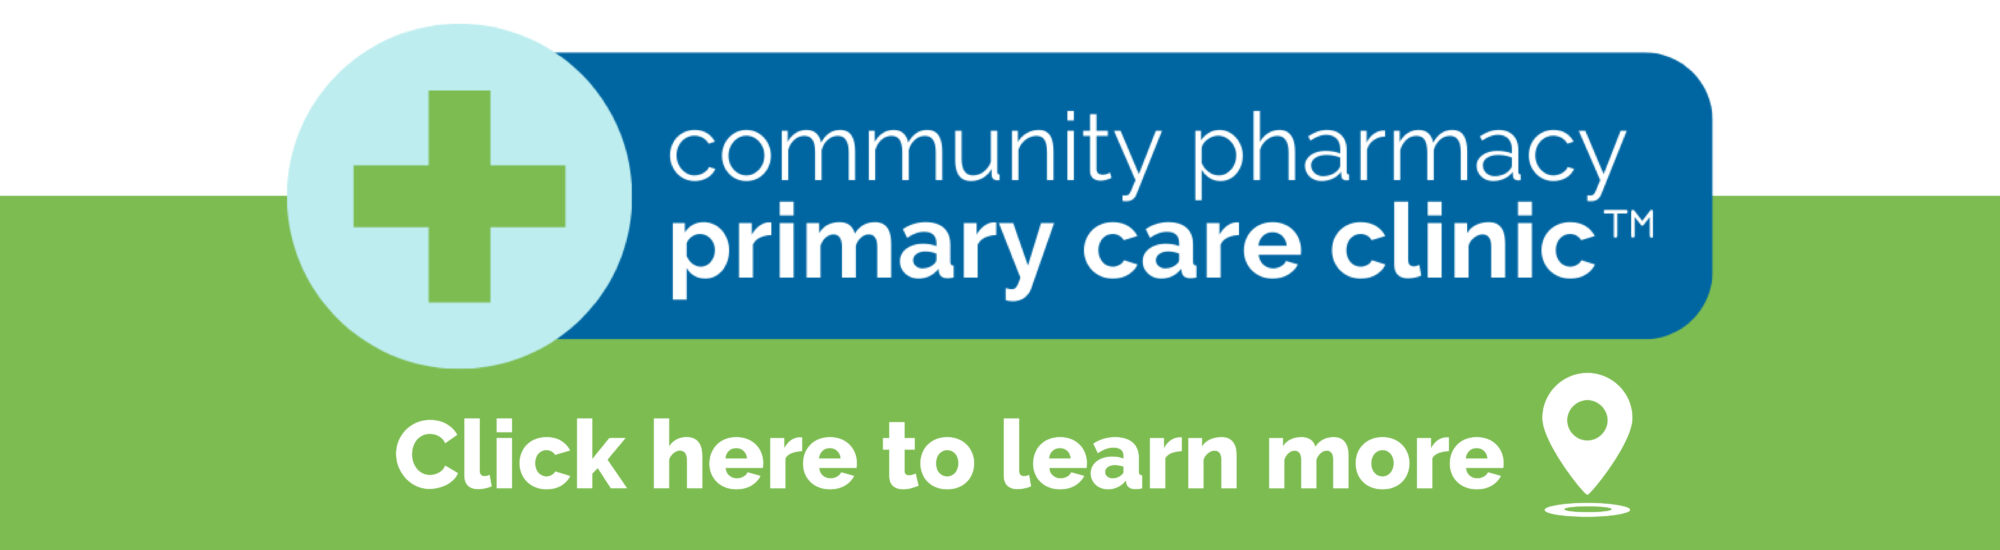 Community Pharmacy Primary Care Clinic. Click here to learn more.